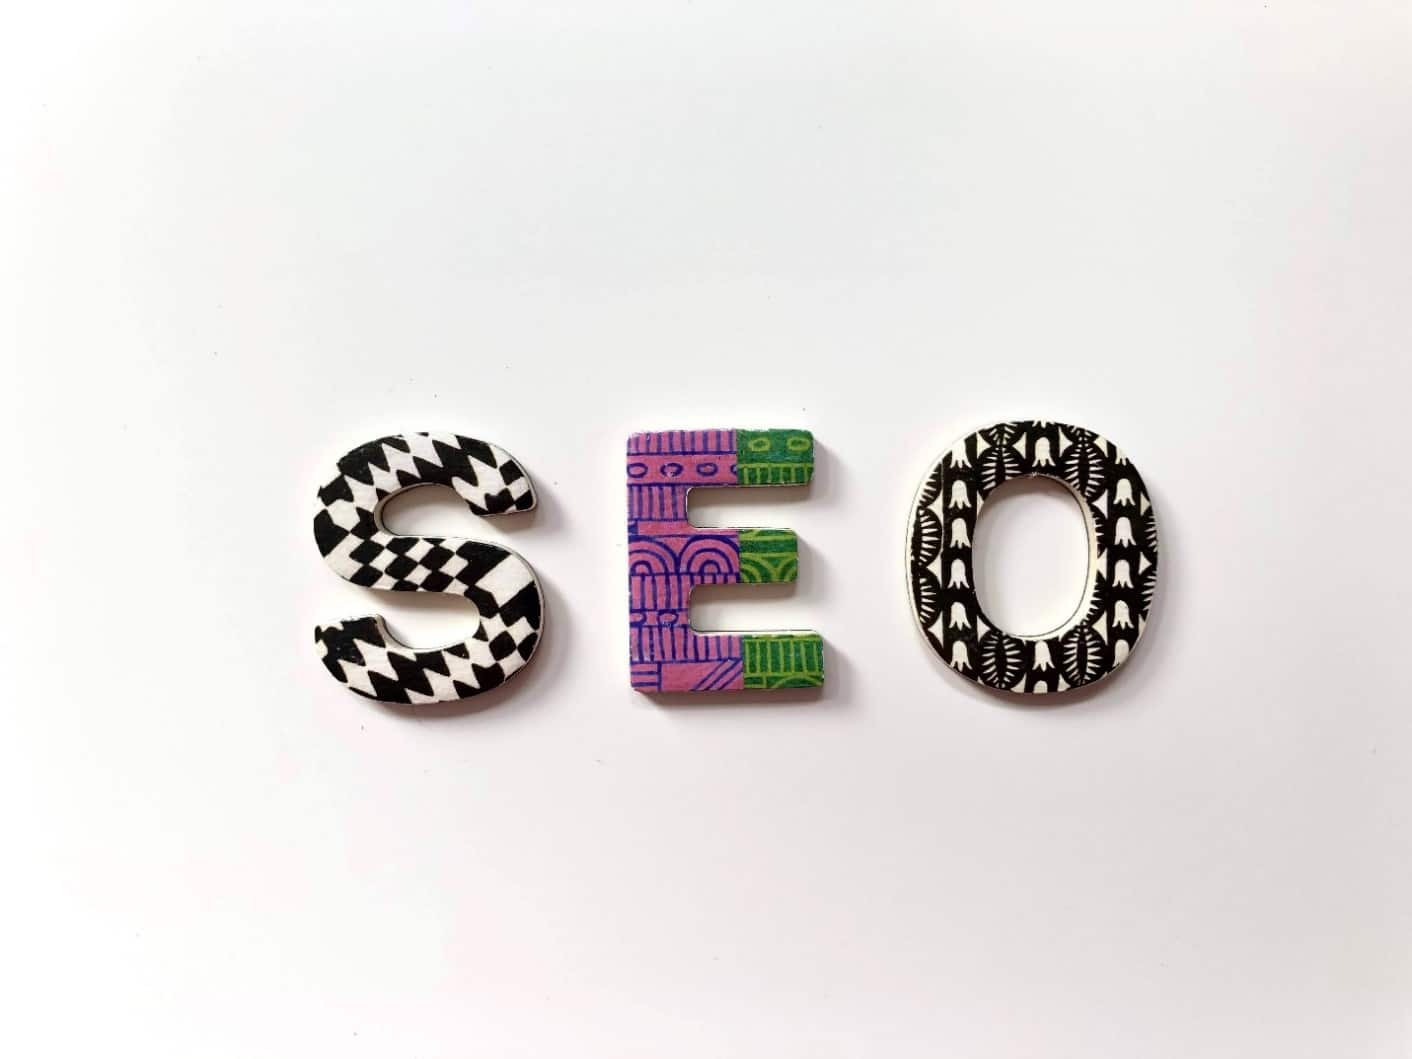 SEO' in colorful alphabets